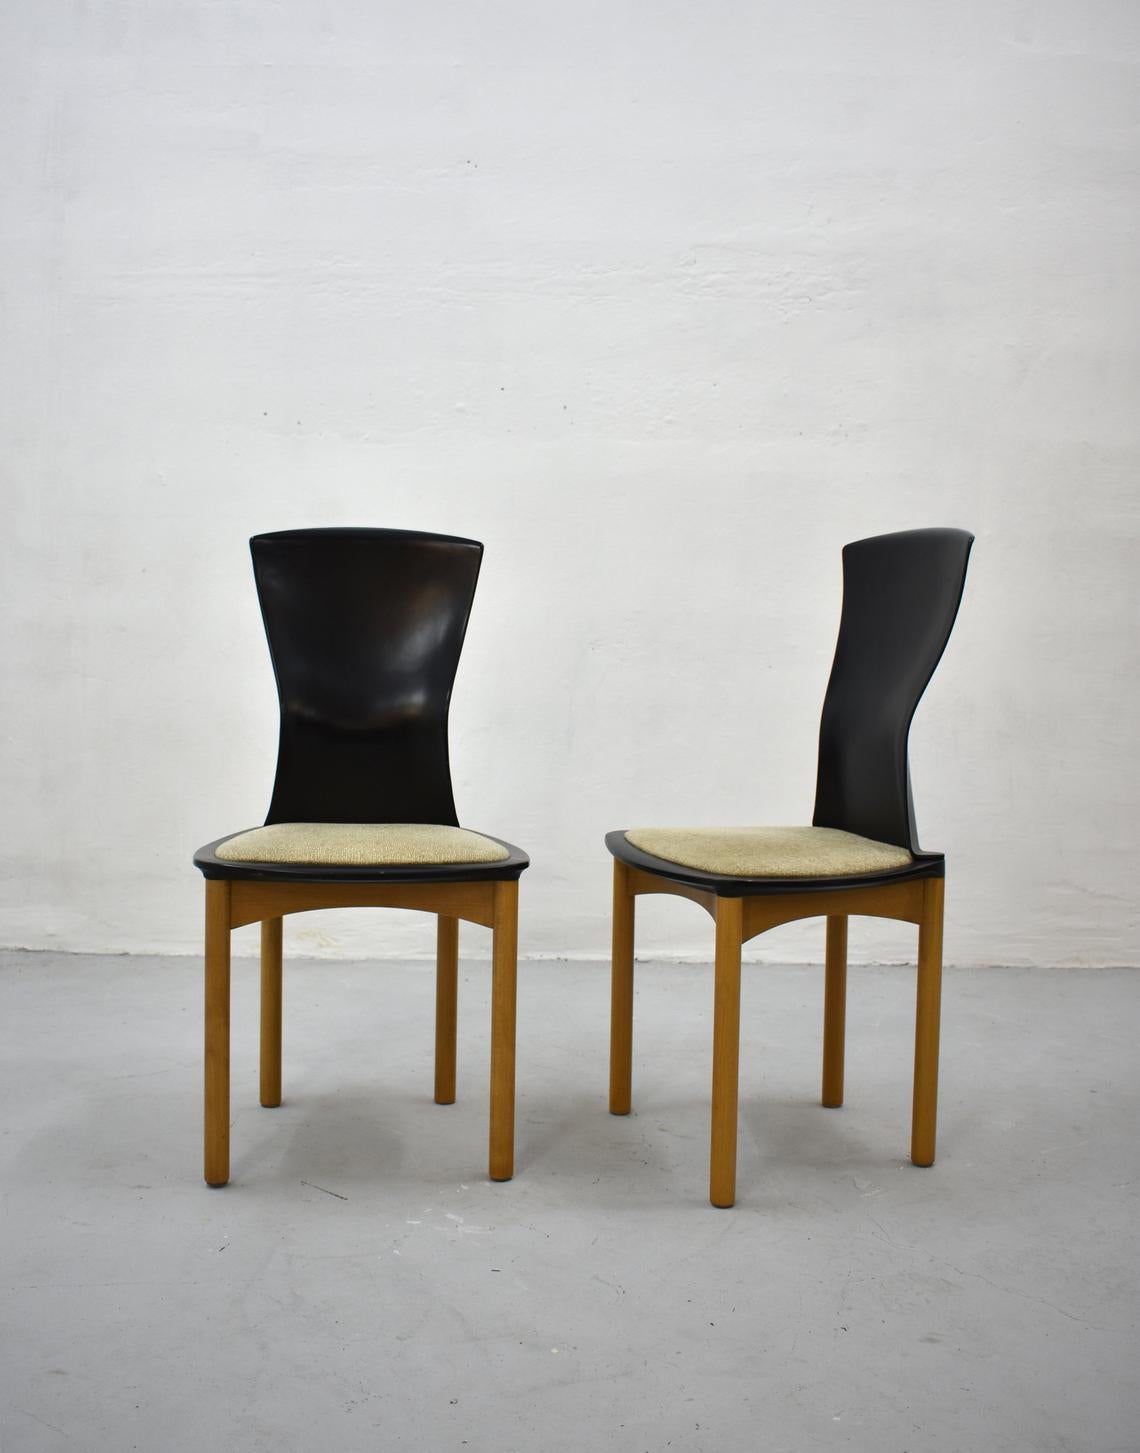 Rare dining chairs, set of 6, designed by Francesco Binfaré for Italian furniture company Cassina in the 1980s

Postmodern, sculptural design. Wooden legs with compact seat and backrest made of black pagwood and a small upholstered cushion.